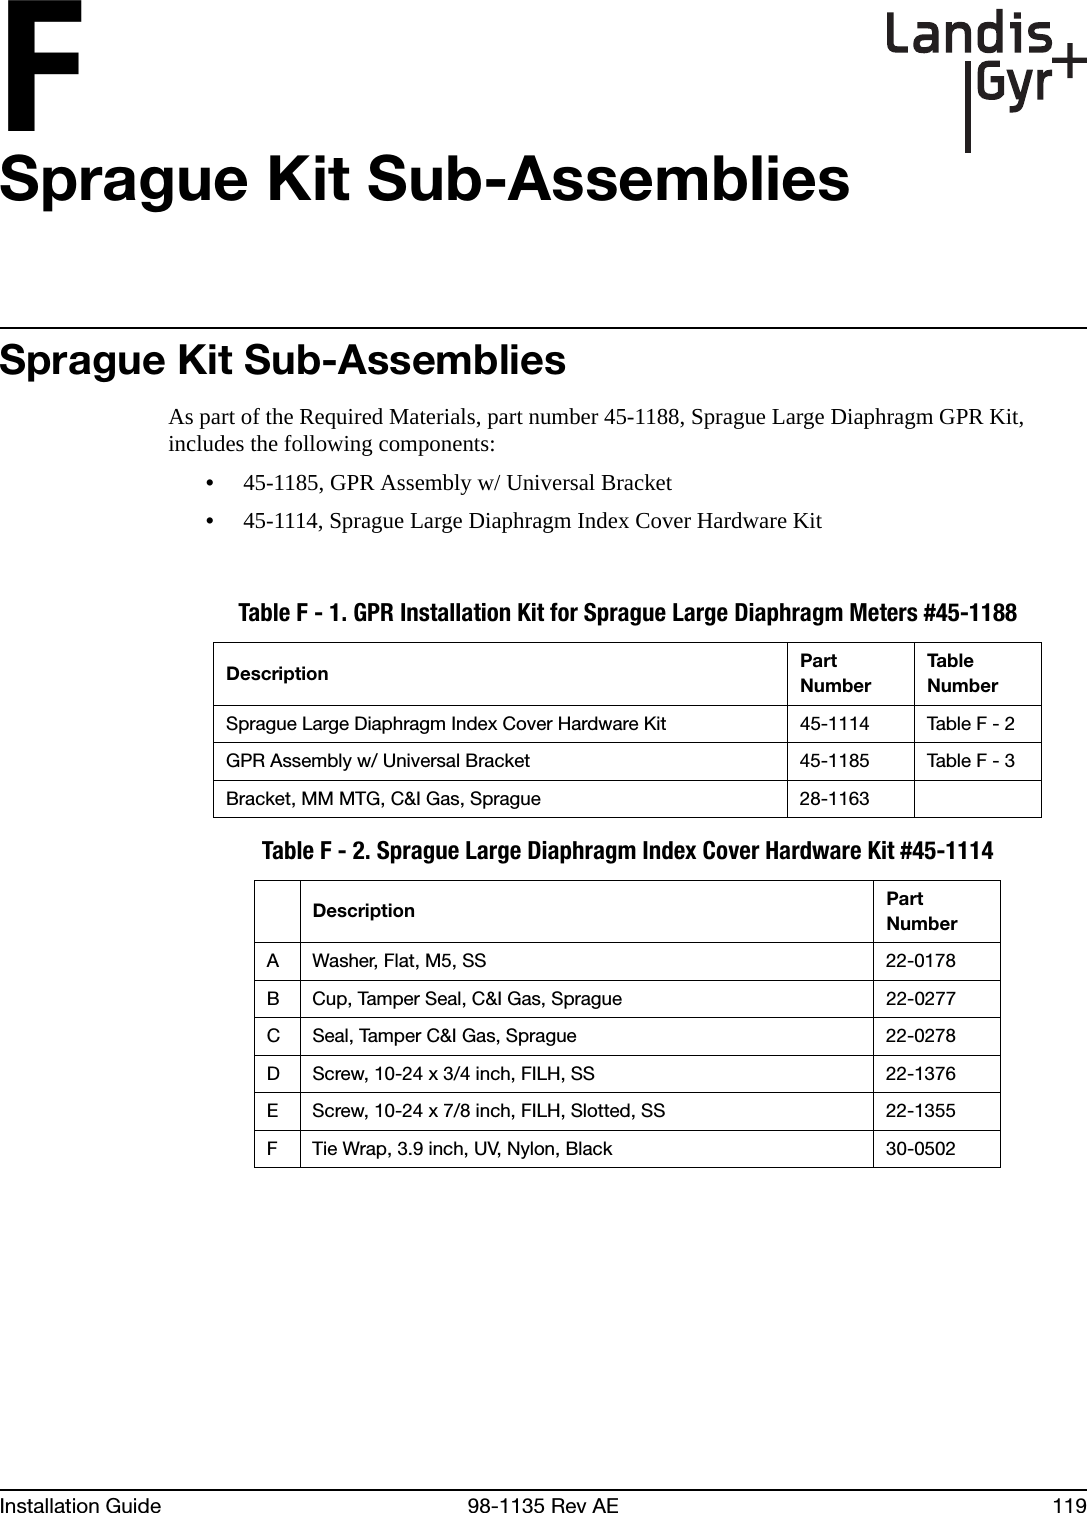 FInstallation Guide 98-1135 Rev AE 119Sprague Kit Sub-AssembliesSprague Kit Sub-AssembliesAs part of the Required Materials, part number 45-1188, Sprague Large Diaphragm GPR Kit, includes the following components:•45-1185, GPR Assembly w/ Universal Bracket•45-1114, Sprague Large Diaphragm Index Cover Hardware KitTable F - 1. GPR Installation Kit for Sprague Large Diaphragm Meters #45-1188Description Part NumberTab le NumberSprague Large Diaphragm Index Cover Hardware Kit 45-1114 Table F - 2GPR Assembly w/ Universal Bracket 45-1185 Table F - 3Bracket, MM MTG, C&amp;I Gas, Sprague 28-1163Table F - 2. Sprague Large Diaphragm Index Cover Hardware Kit #45-1114Description Part NumberA Washer, Flat, M5, SS 22-0178B Cup, Tamper Seal, C&amp;I Gas, Sprague 22-0277C Seal, Tamper C&amp;I Gas, Sprague 22-0278D Screw, 10-24 x 3/4 inch, FILH, SS 22-1376E Screw, 10-24 x 7/8 inch, FILH, Slotted, SS 22-1355F Tie Wrap, 3.9 inch, UV, Nylon, Black 30-0502